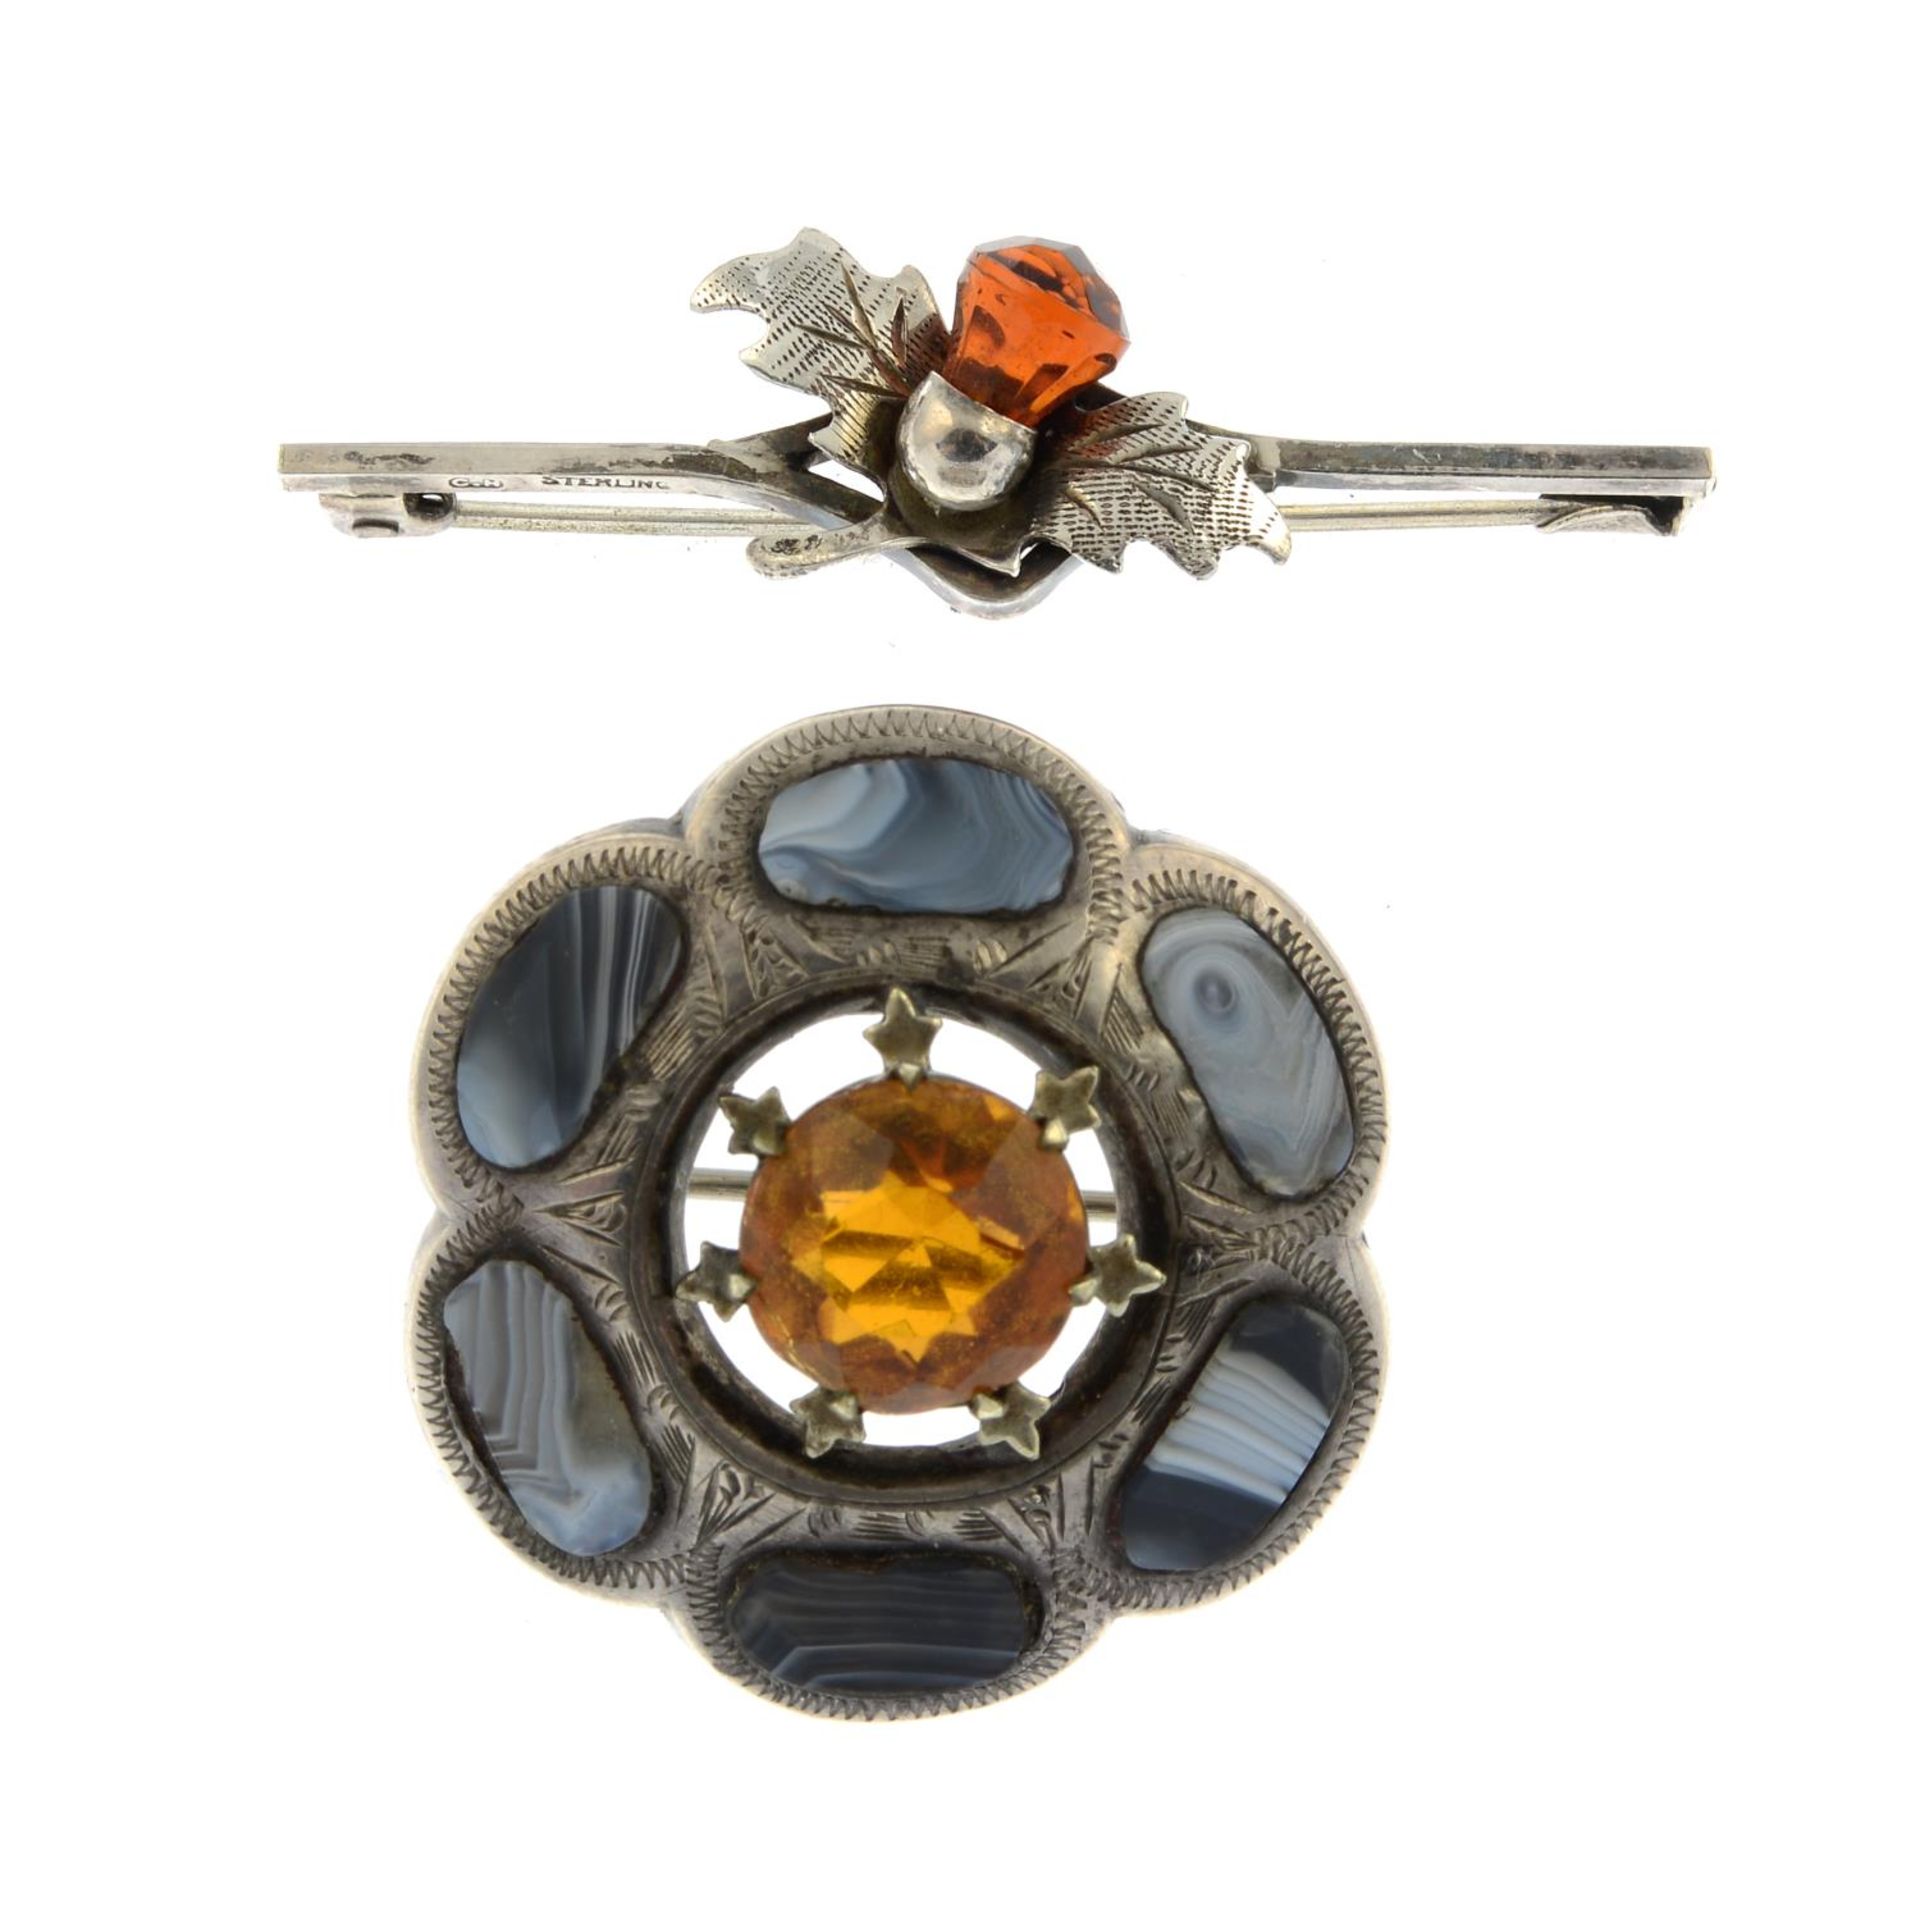 Three Scottish agate and paste brooches.One with marks to indicate silver. - Image 2 of 3